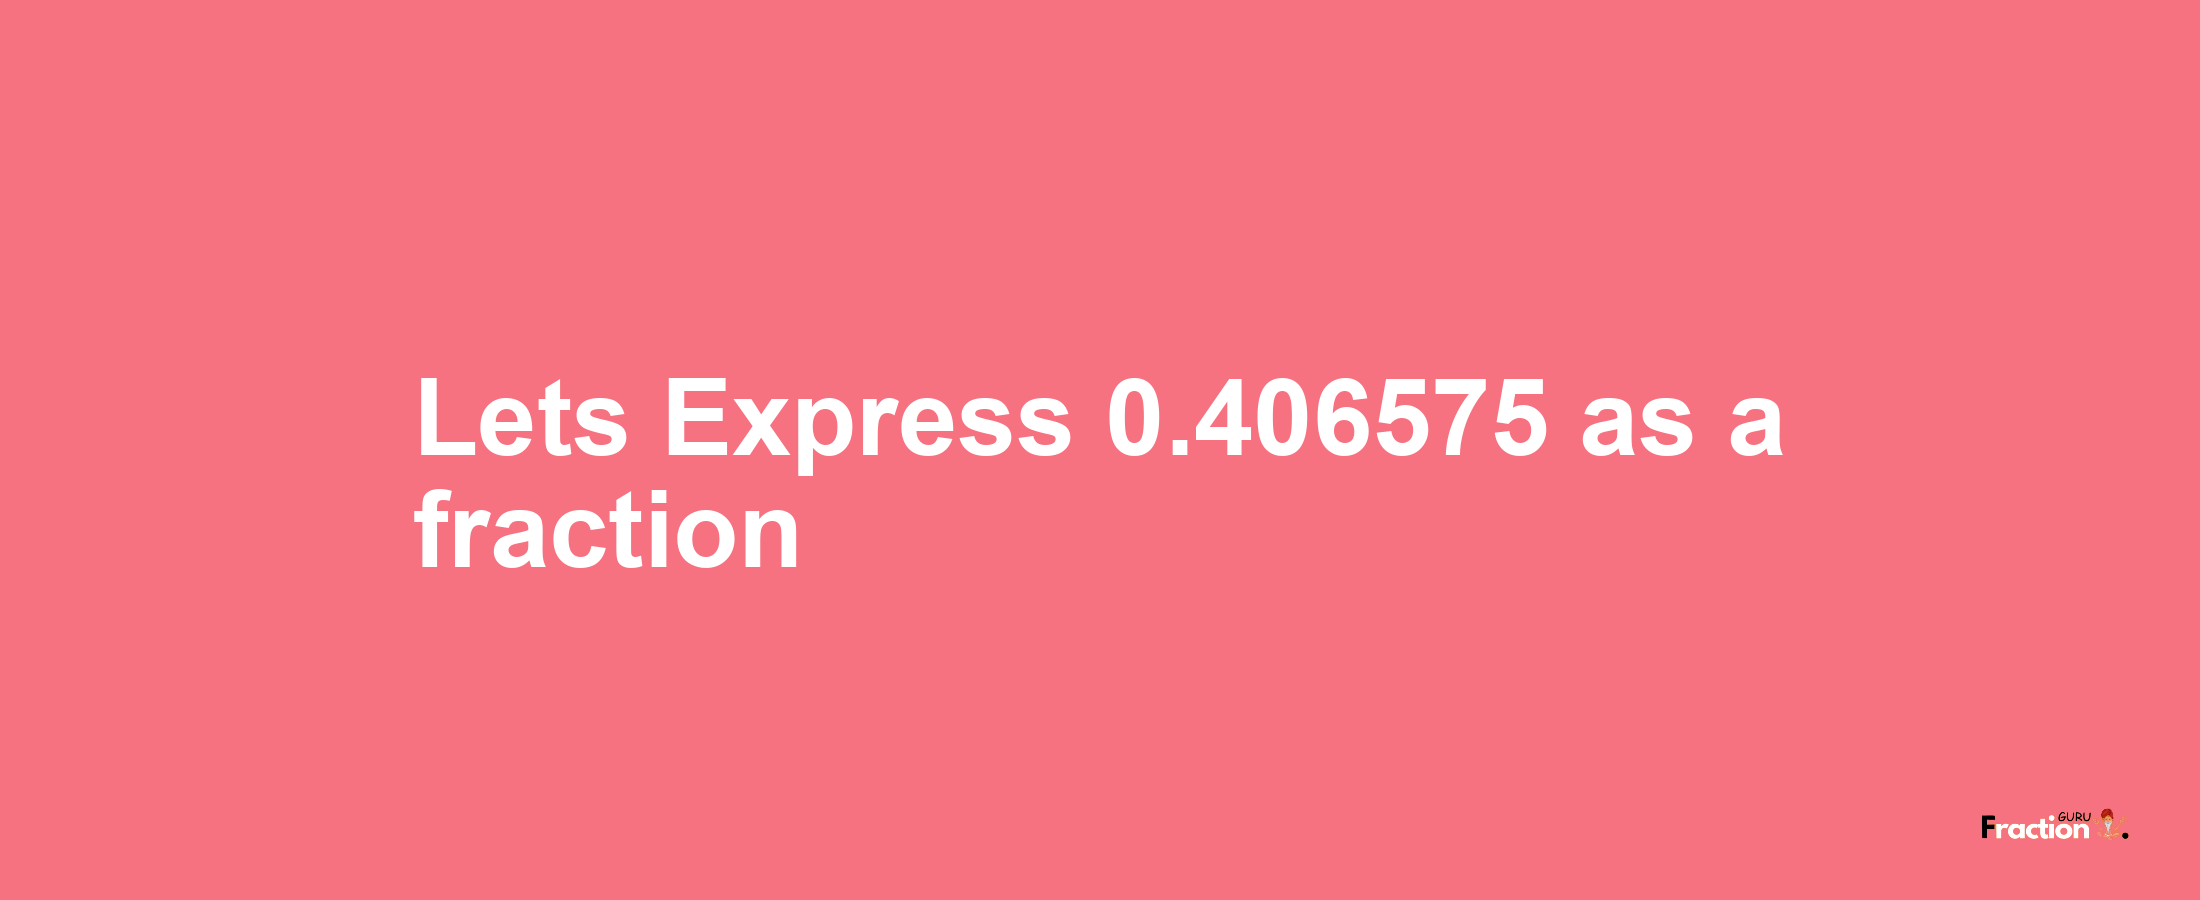 Lets Express 0.406575 as afraction